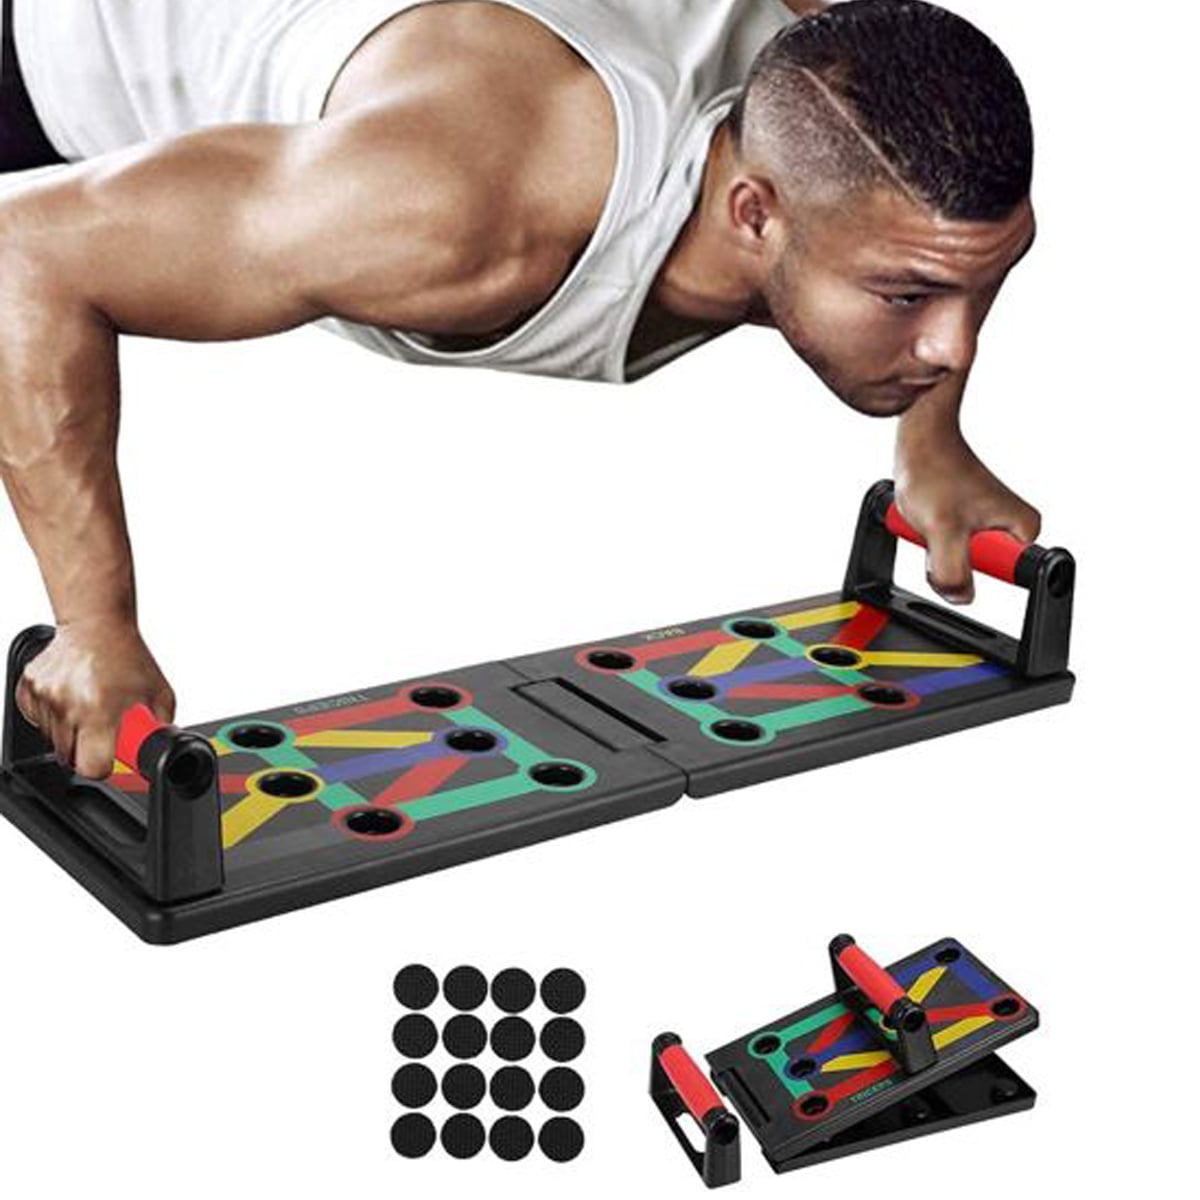 14 in 1 Push Up Rack Board Fitness Workout Training Home Gym Exercise Body Work 